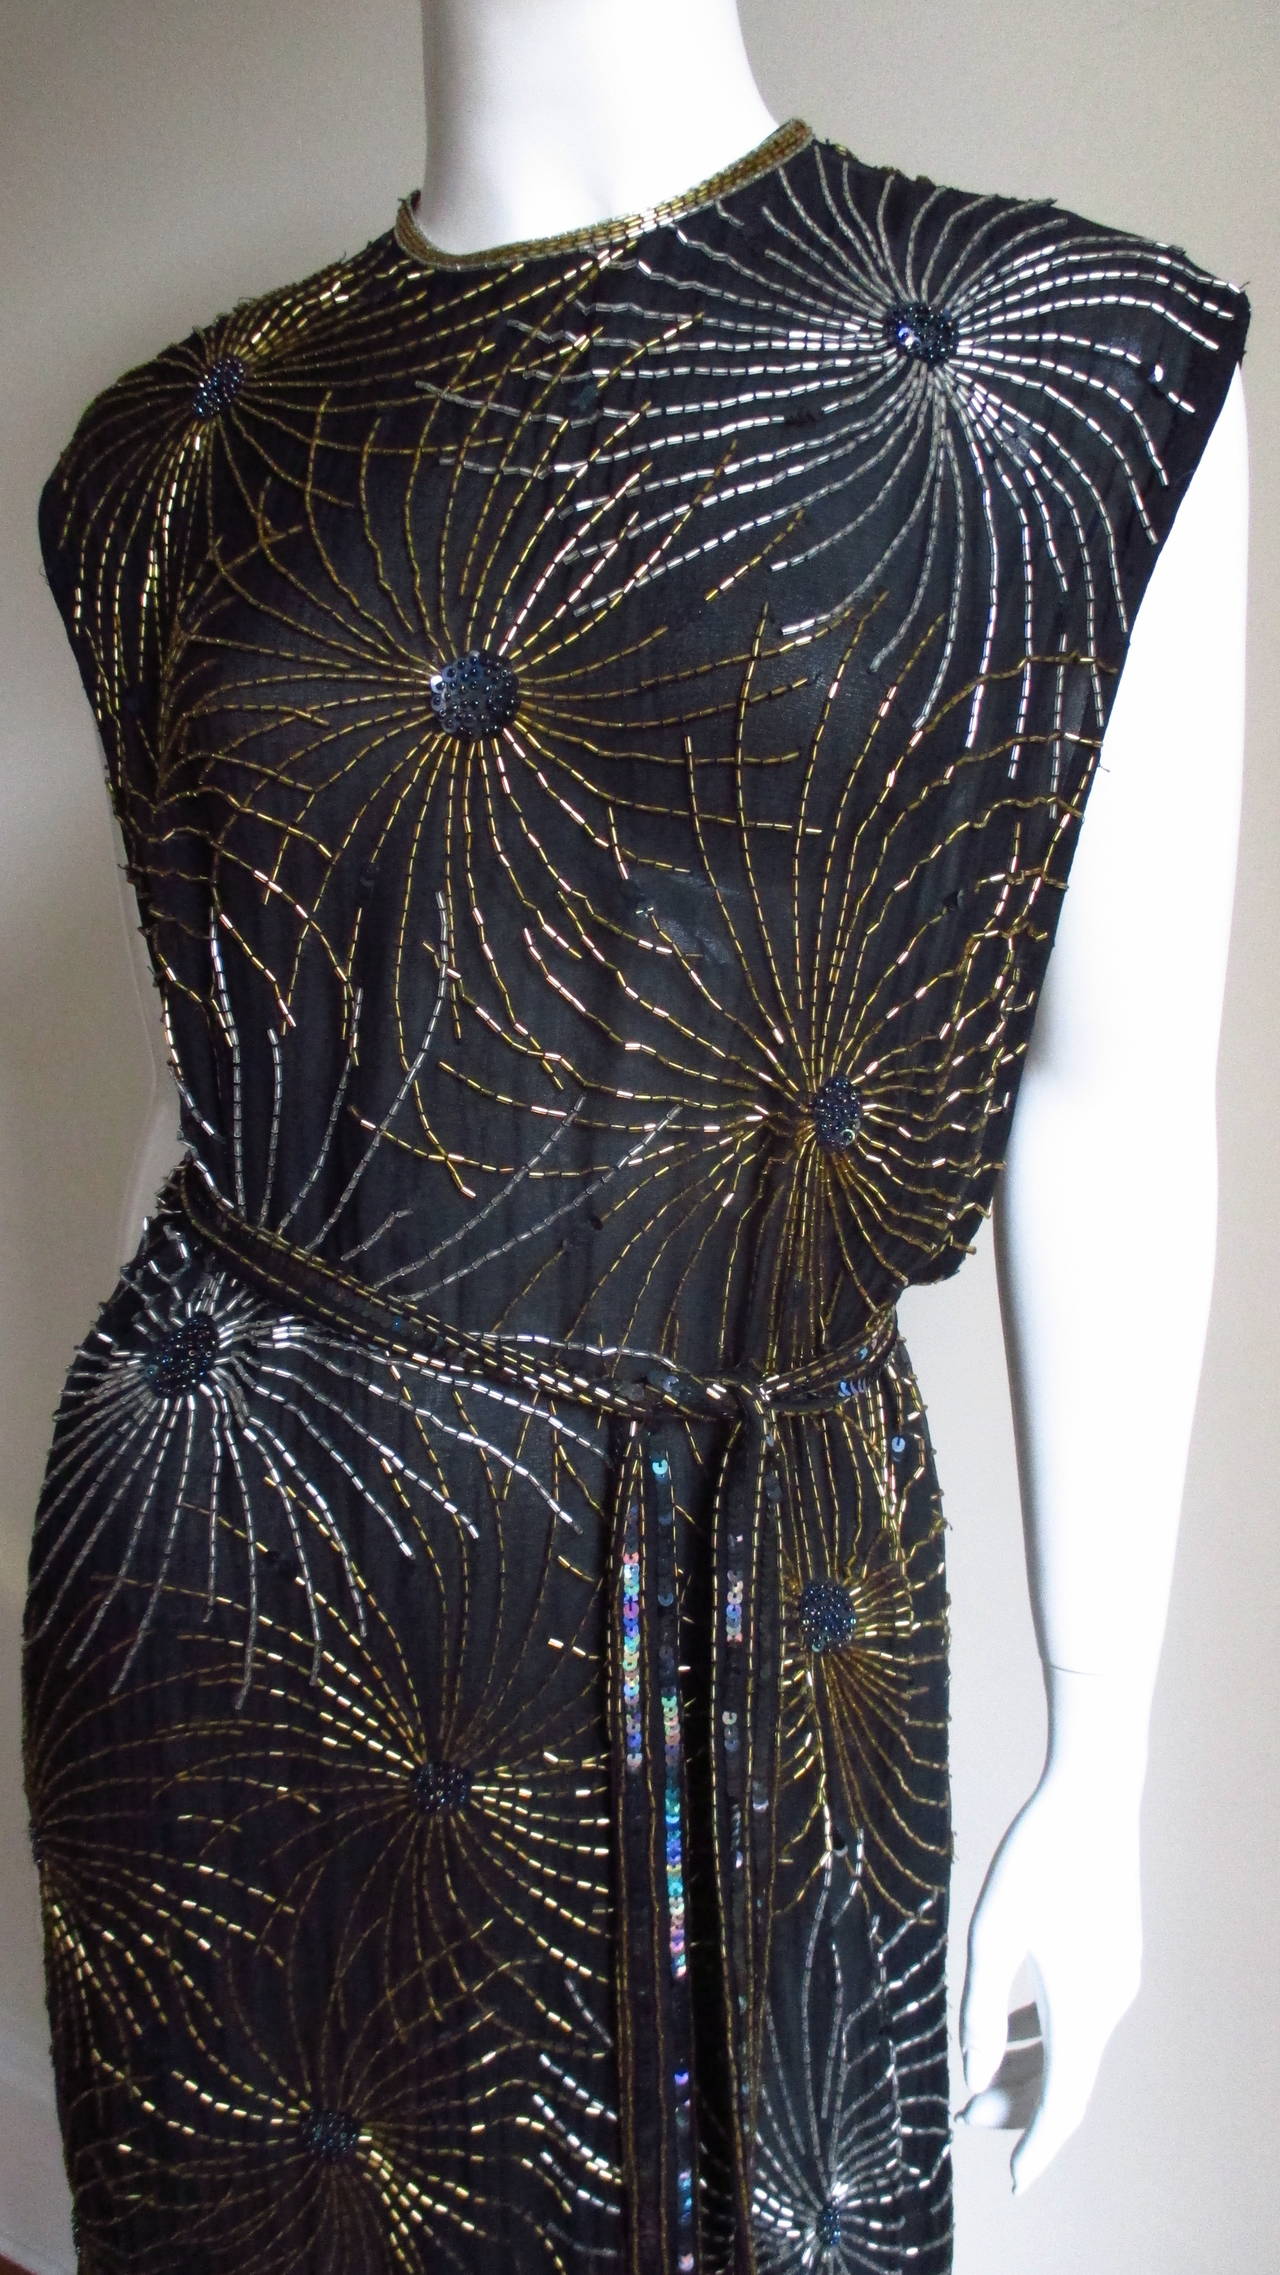 A fabulous black silk dress adorned with sprays of  silver and gold glass tubular beads in a fireworks pattern from Halston lll. It has a simple crew neckline shift with deep cut armholes to the waist exposing the side rib cage and a matching tie